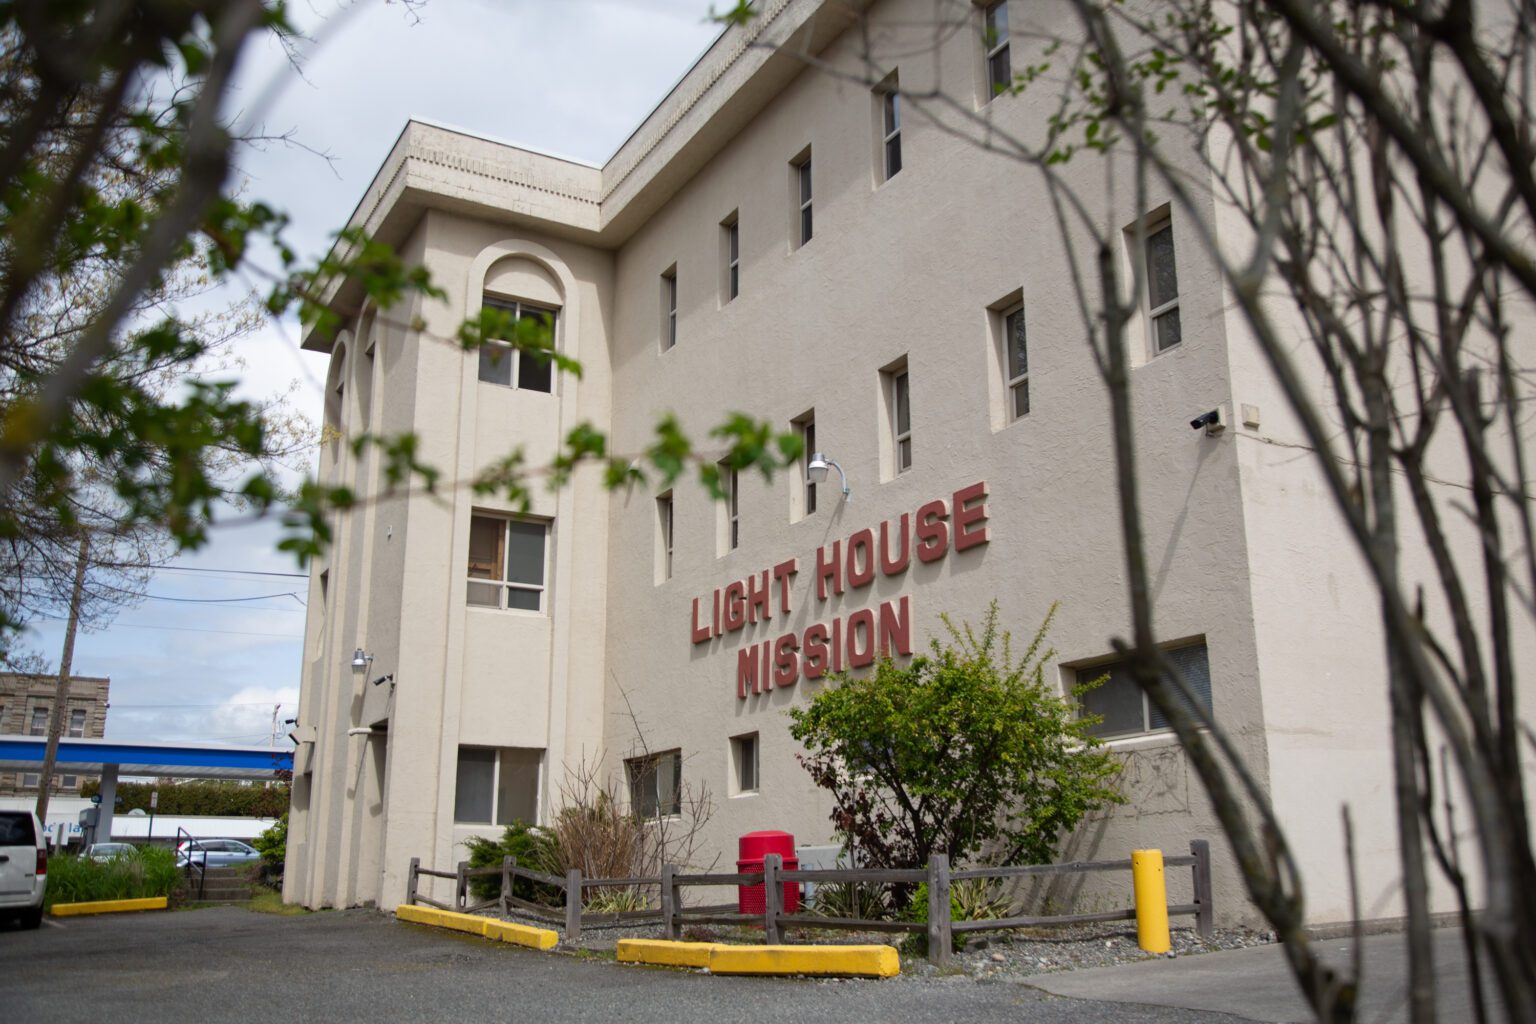 The Lighthouse Mission center at 910 W. Holly St. would be torn down to make room for a new 300-bed homeless shelter. First